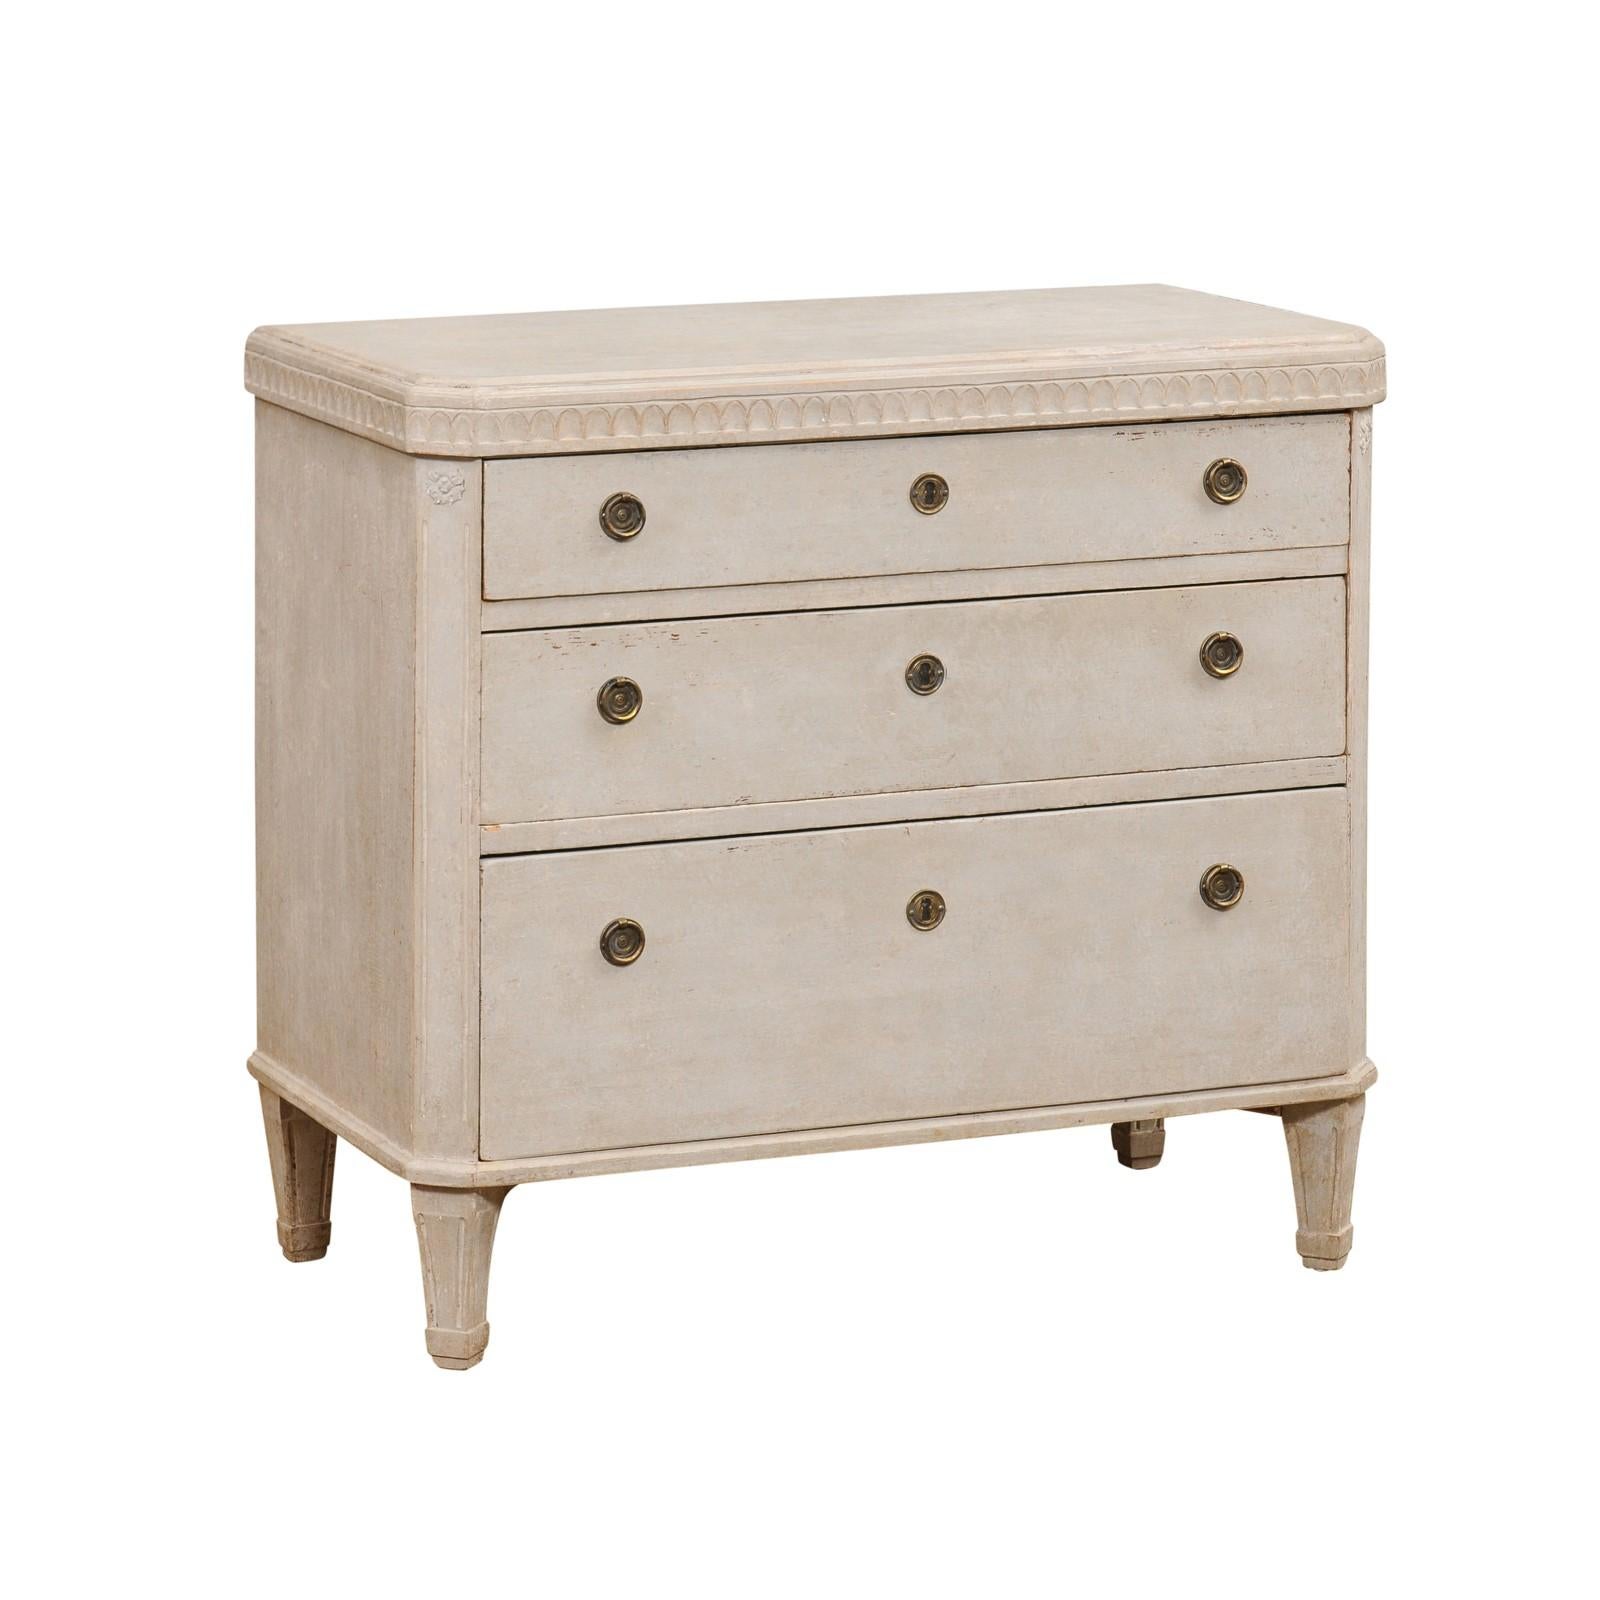 A Swedish Gustavian Style painted wood chest from the mid 19th Century, with carved frieze, three graduated drawers and short tapered feet. Created in Sweden during the second quarter of the 19th Century, this painted chest features a rectangular